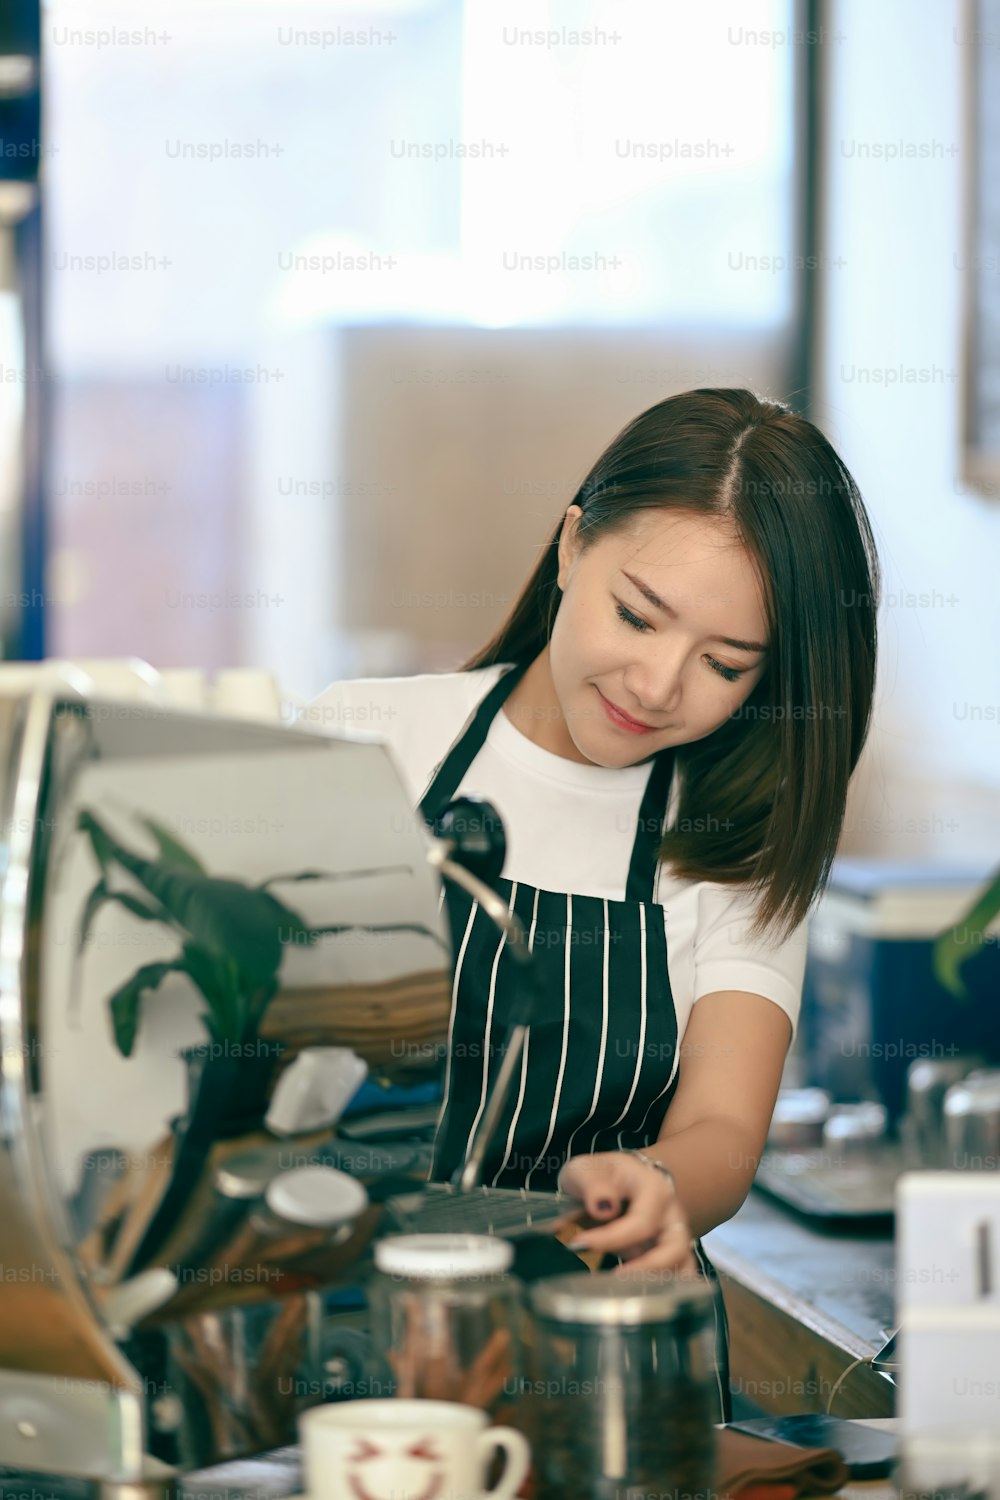 A young woman barista making a cup of coffee while standing behind cafe counter.